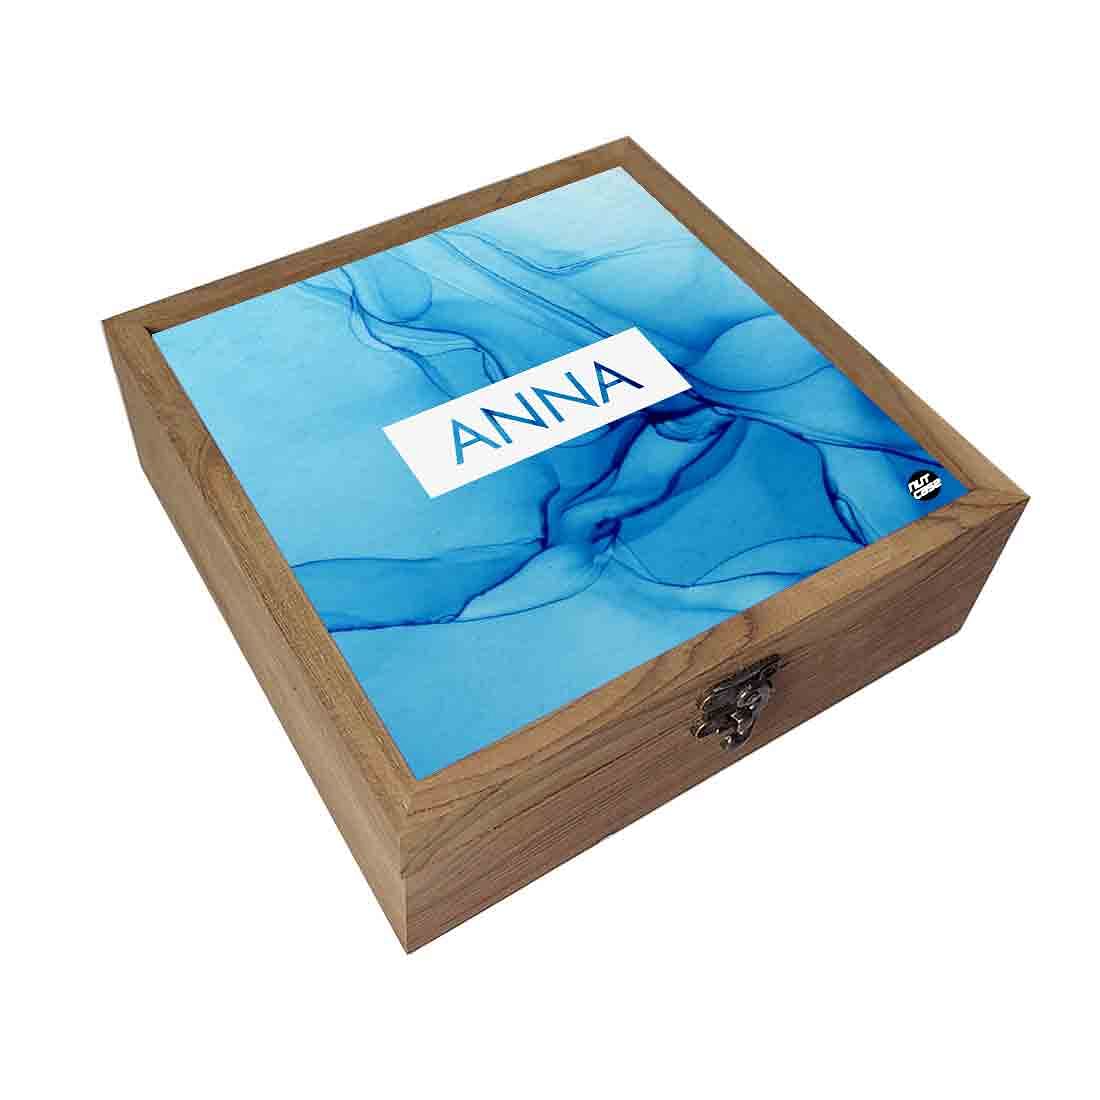 Customized Jewellery Box in Wood for Women - Watercolor Nutcase